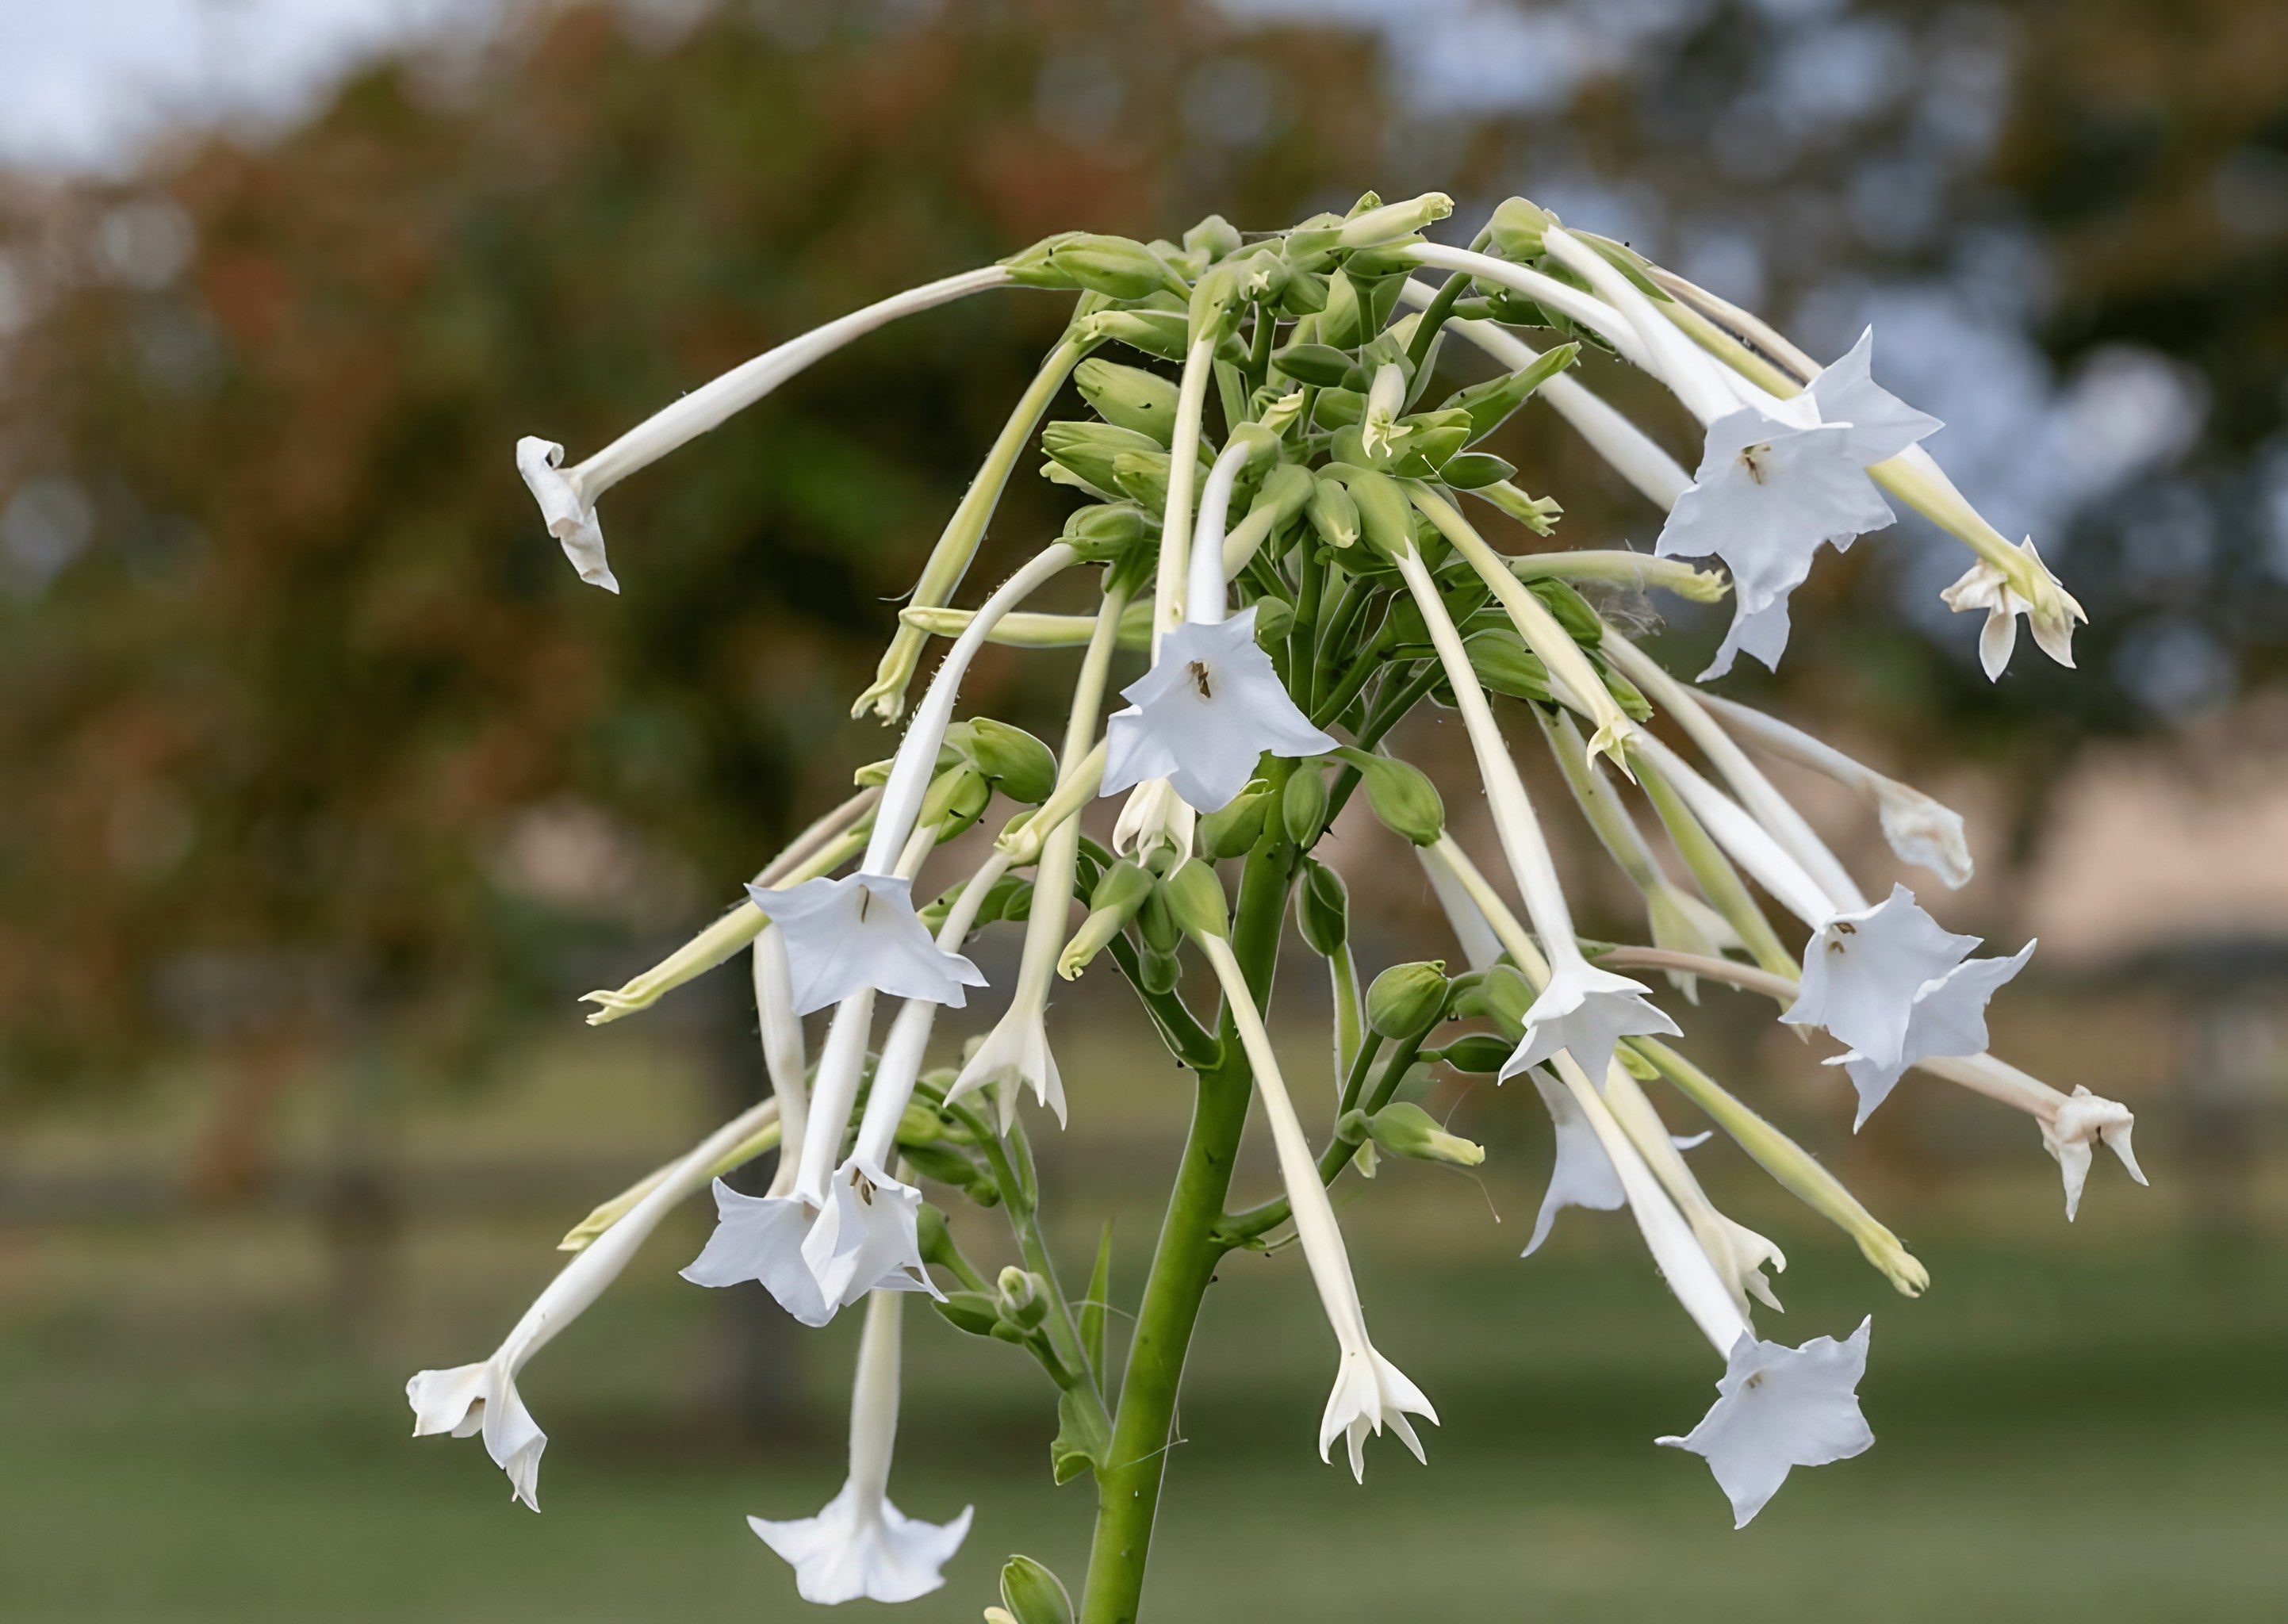 Cluster of white Nicotiana flowers from the White Trumpets variety